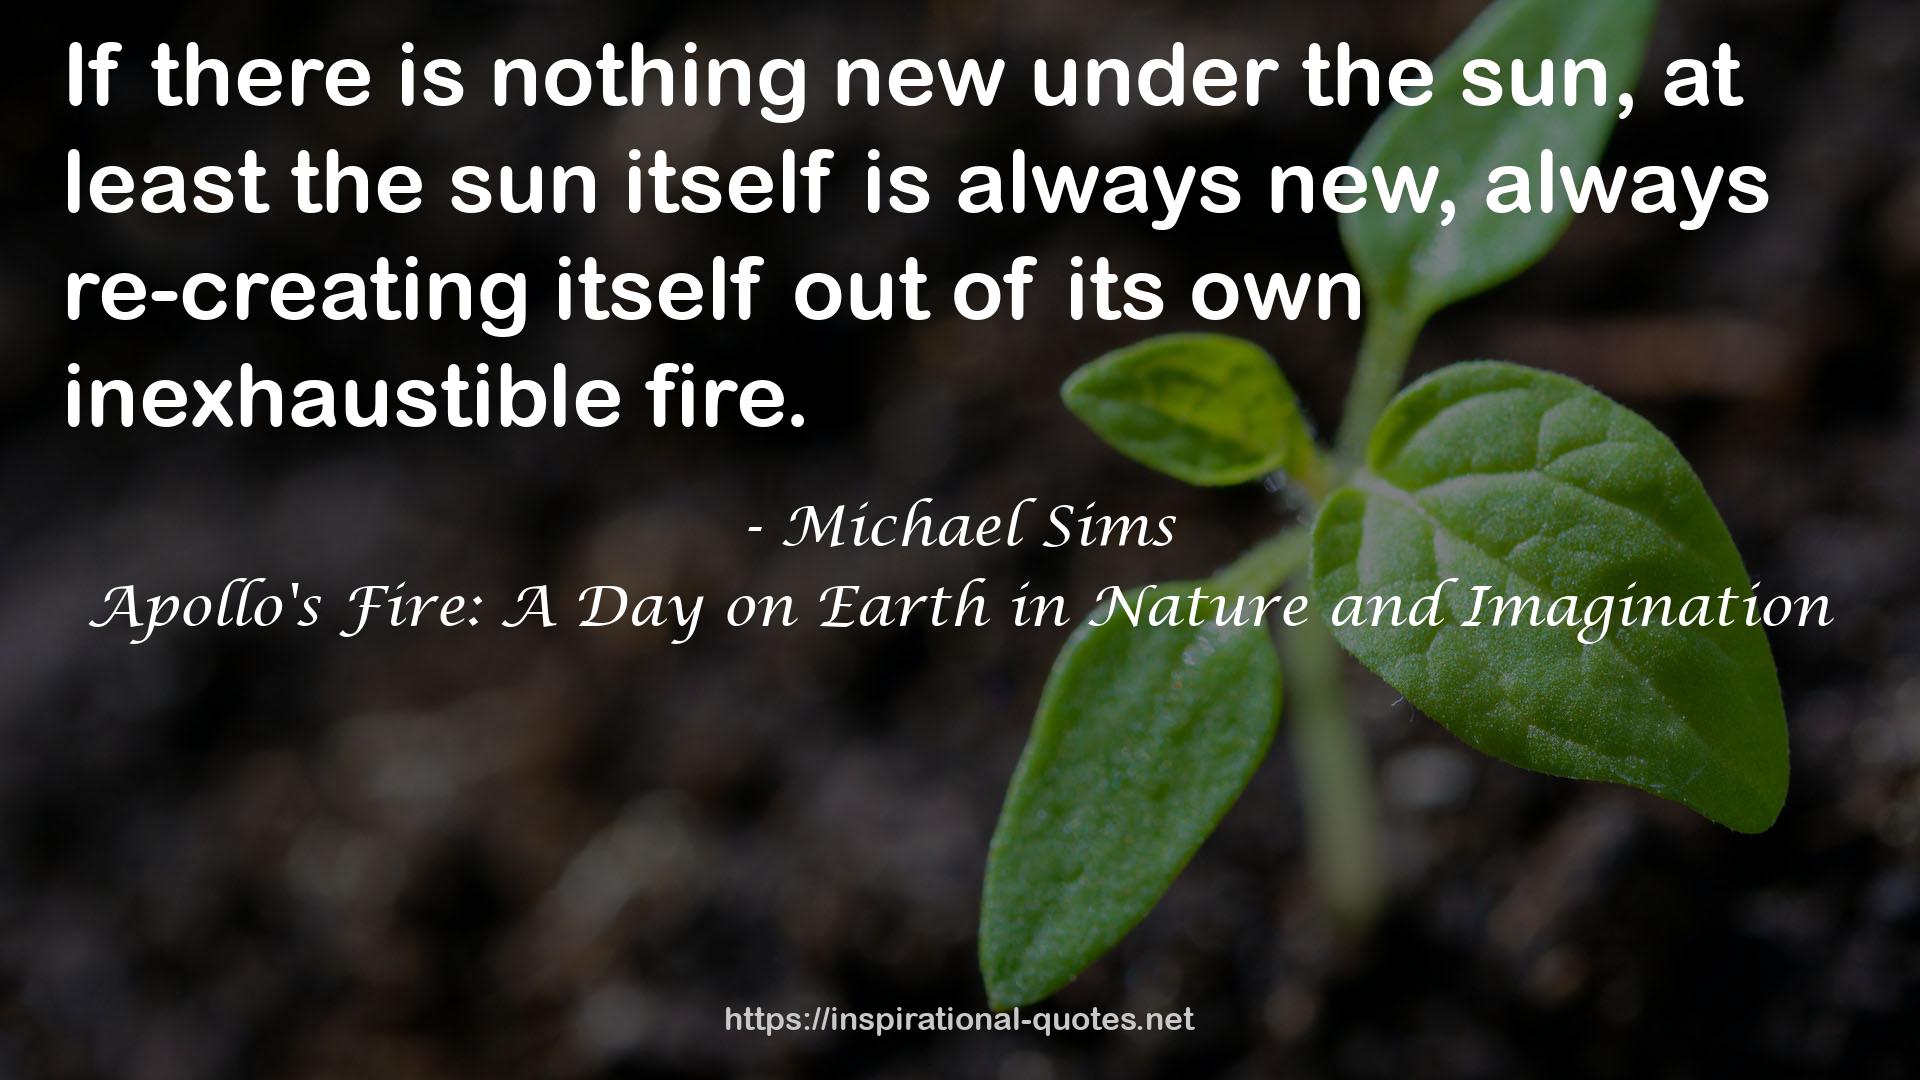 Michael Sims QUOTES